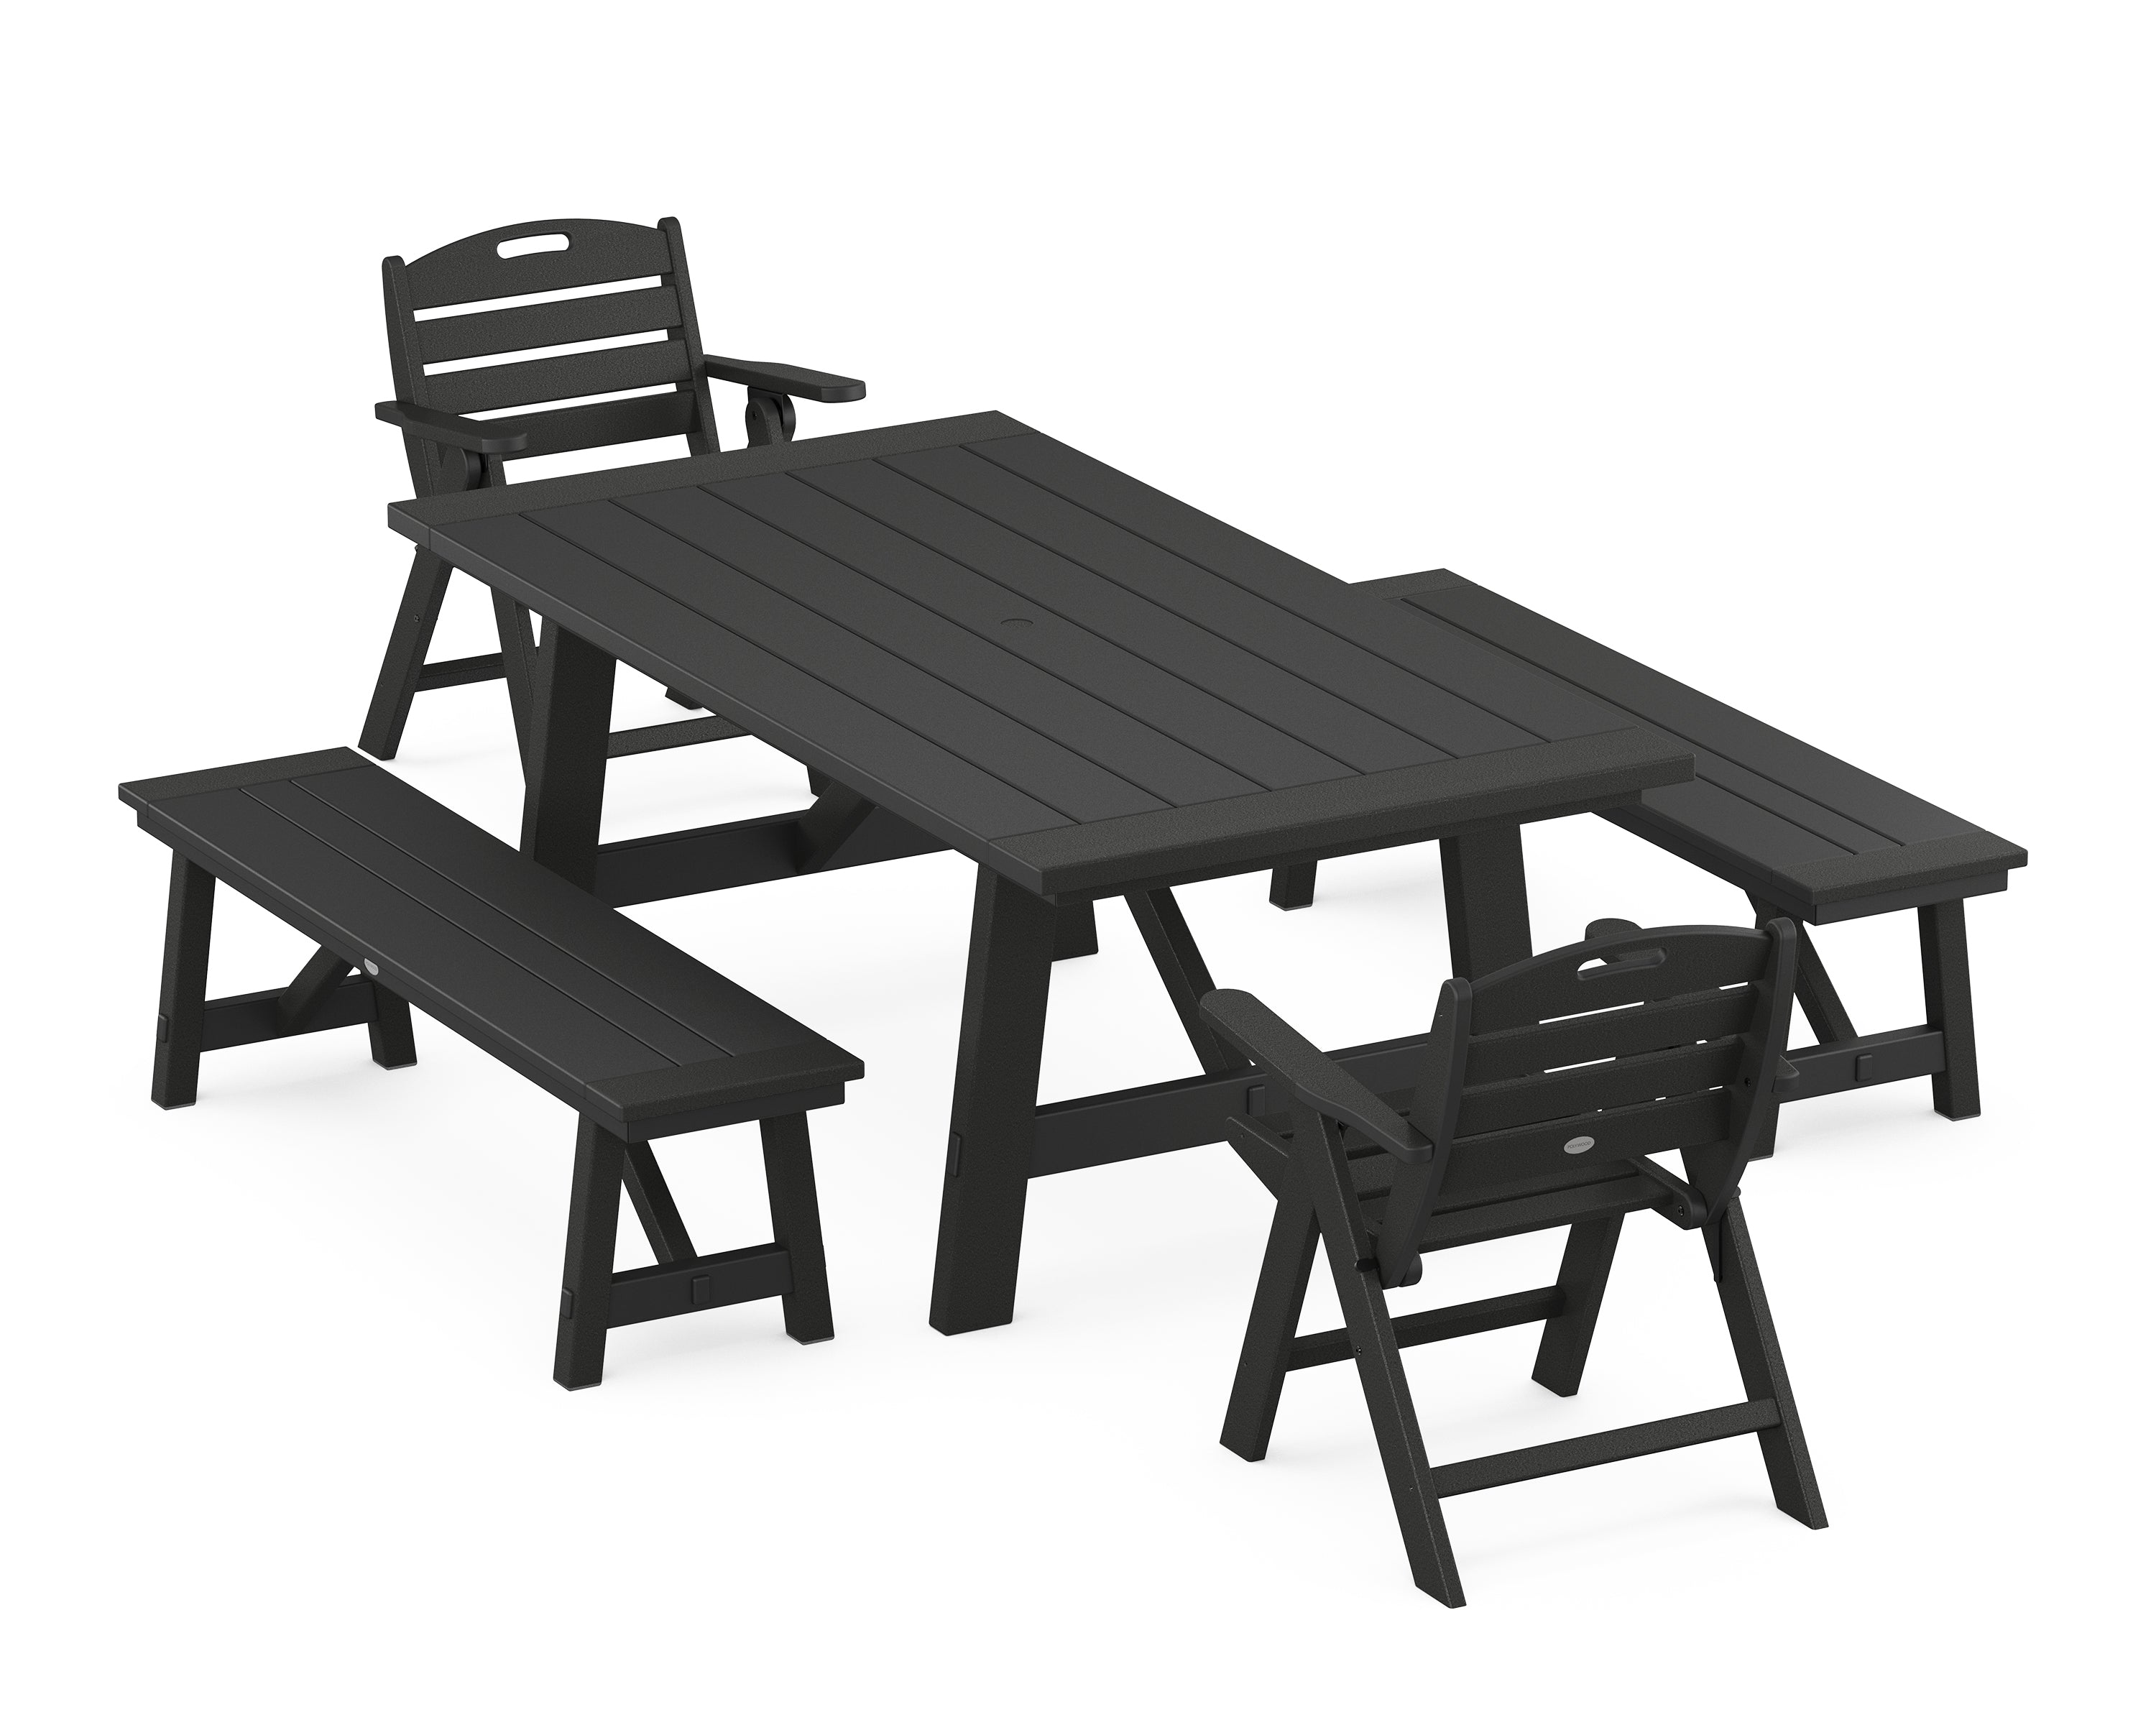 POLYWOOD® Nautical Folding Lowback Chair 5-Piece Rustic Farmhouse Dining Set With Benches in Black